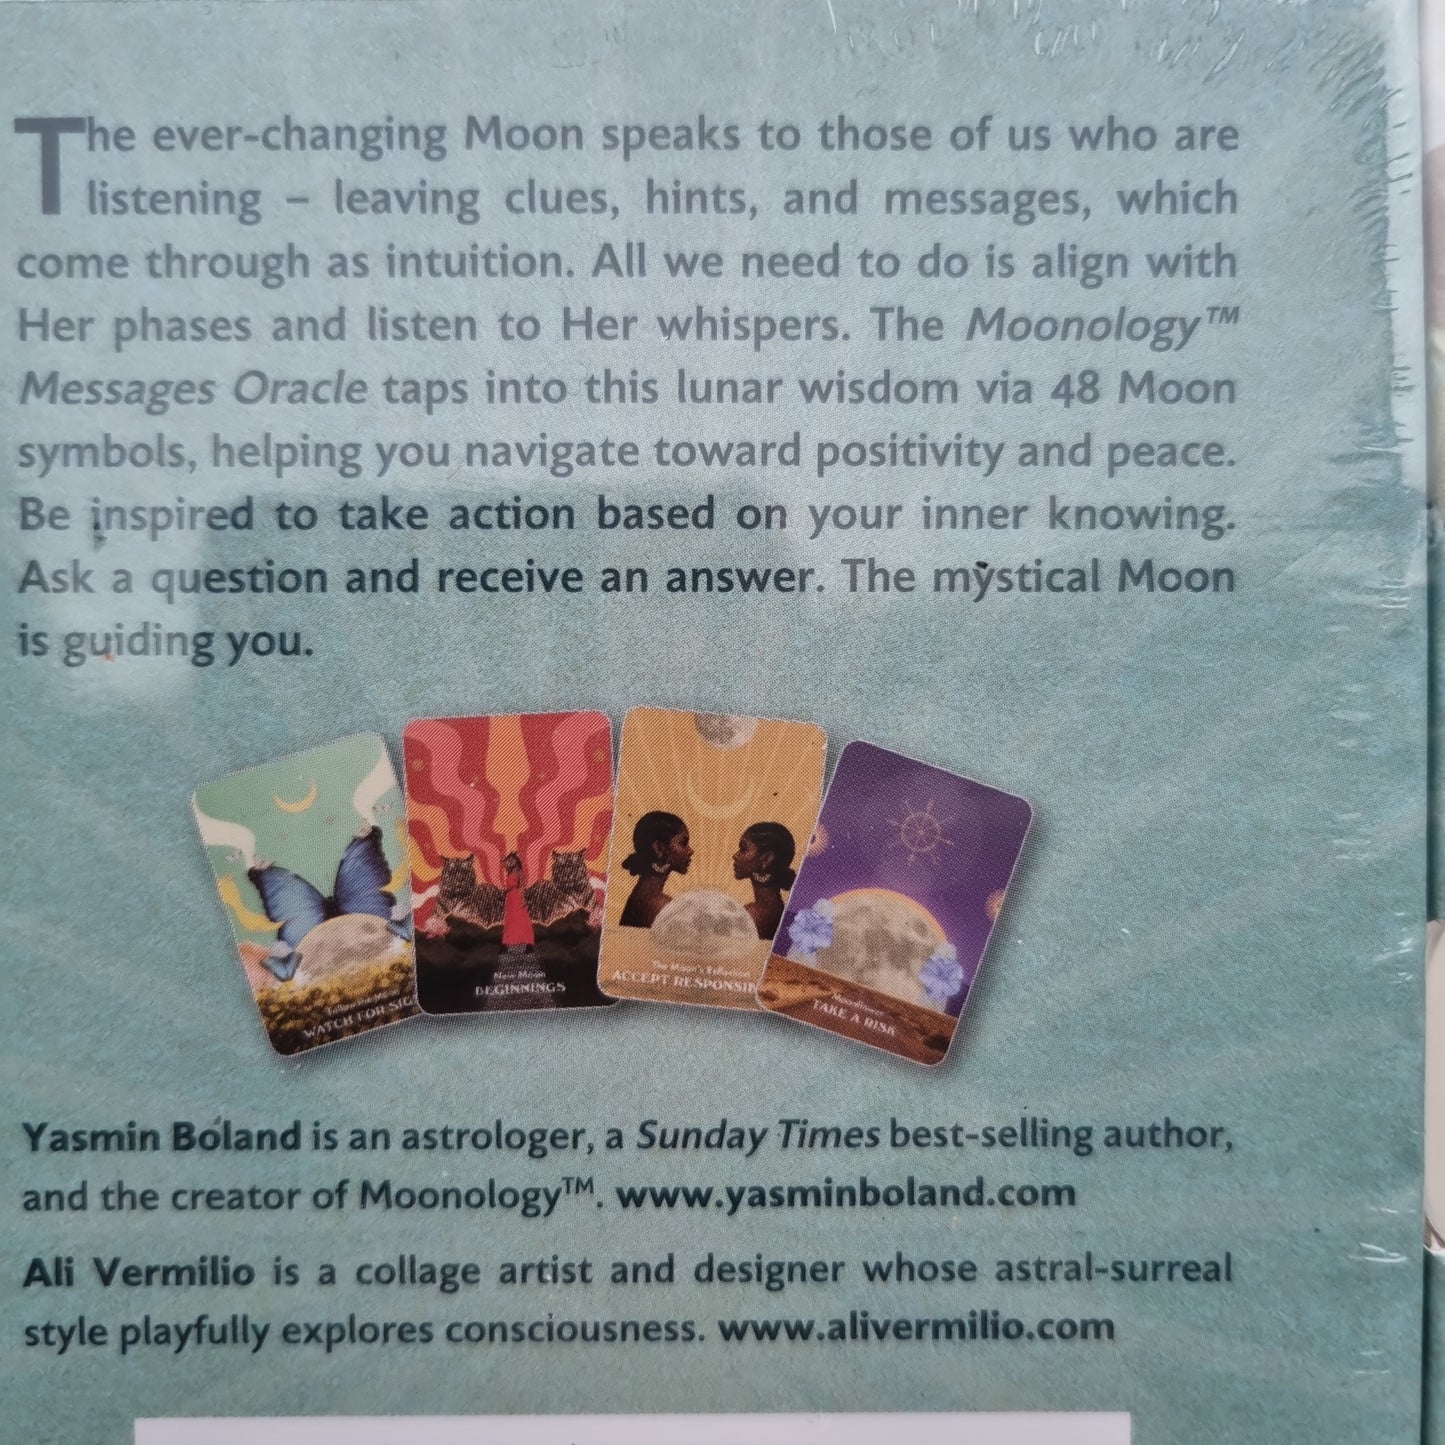 Moonology messages Oracle